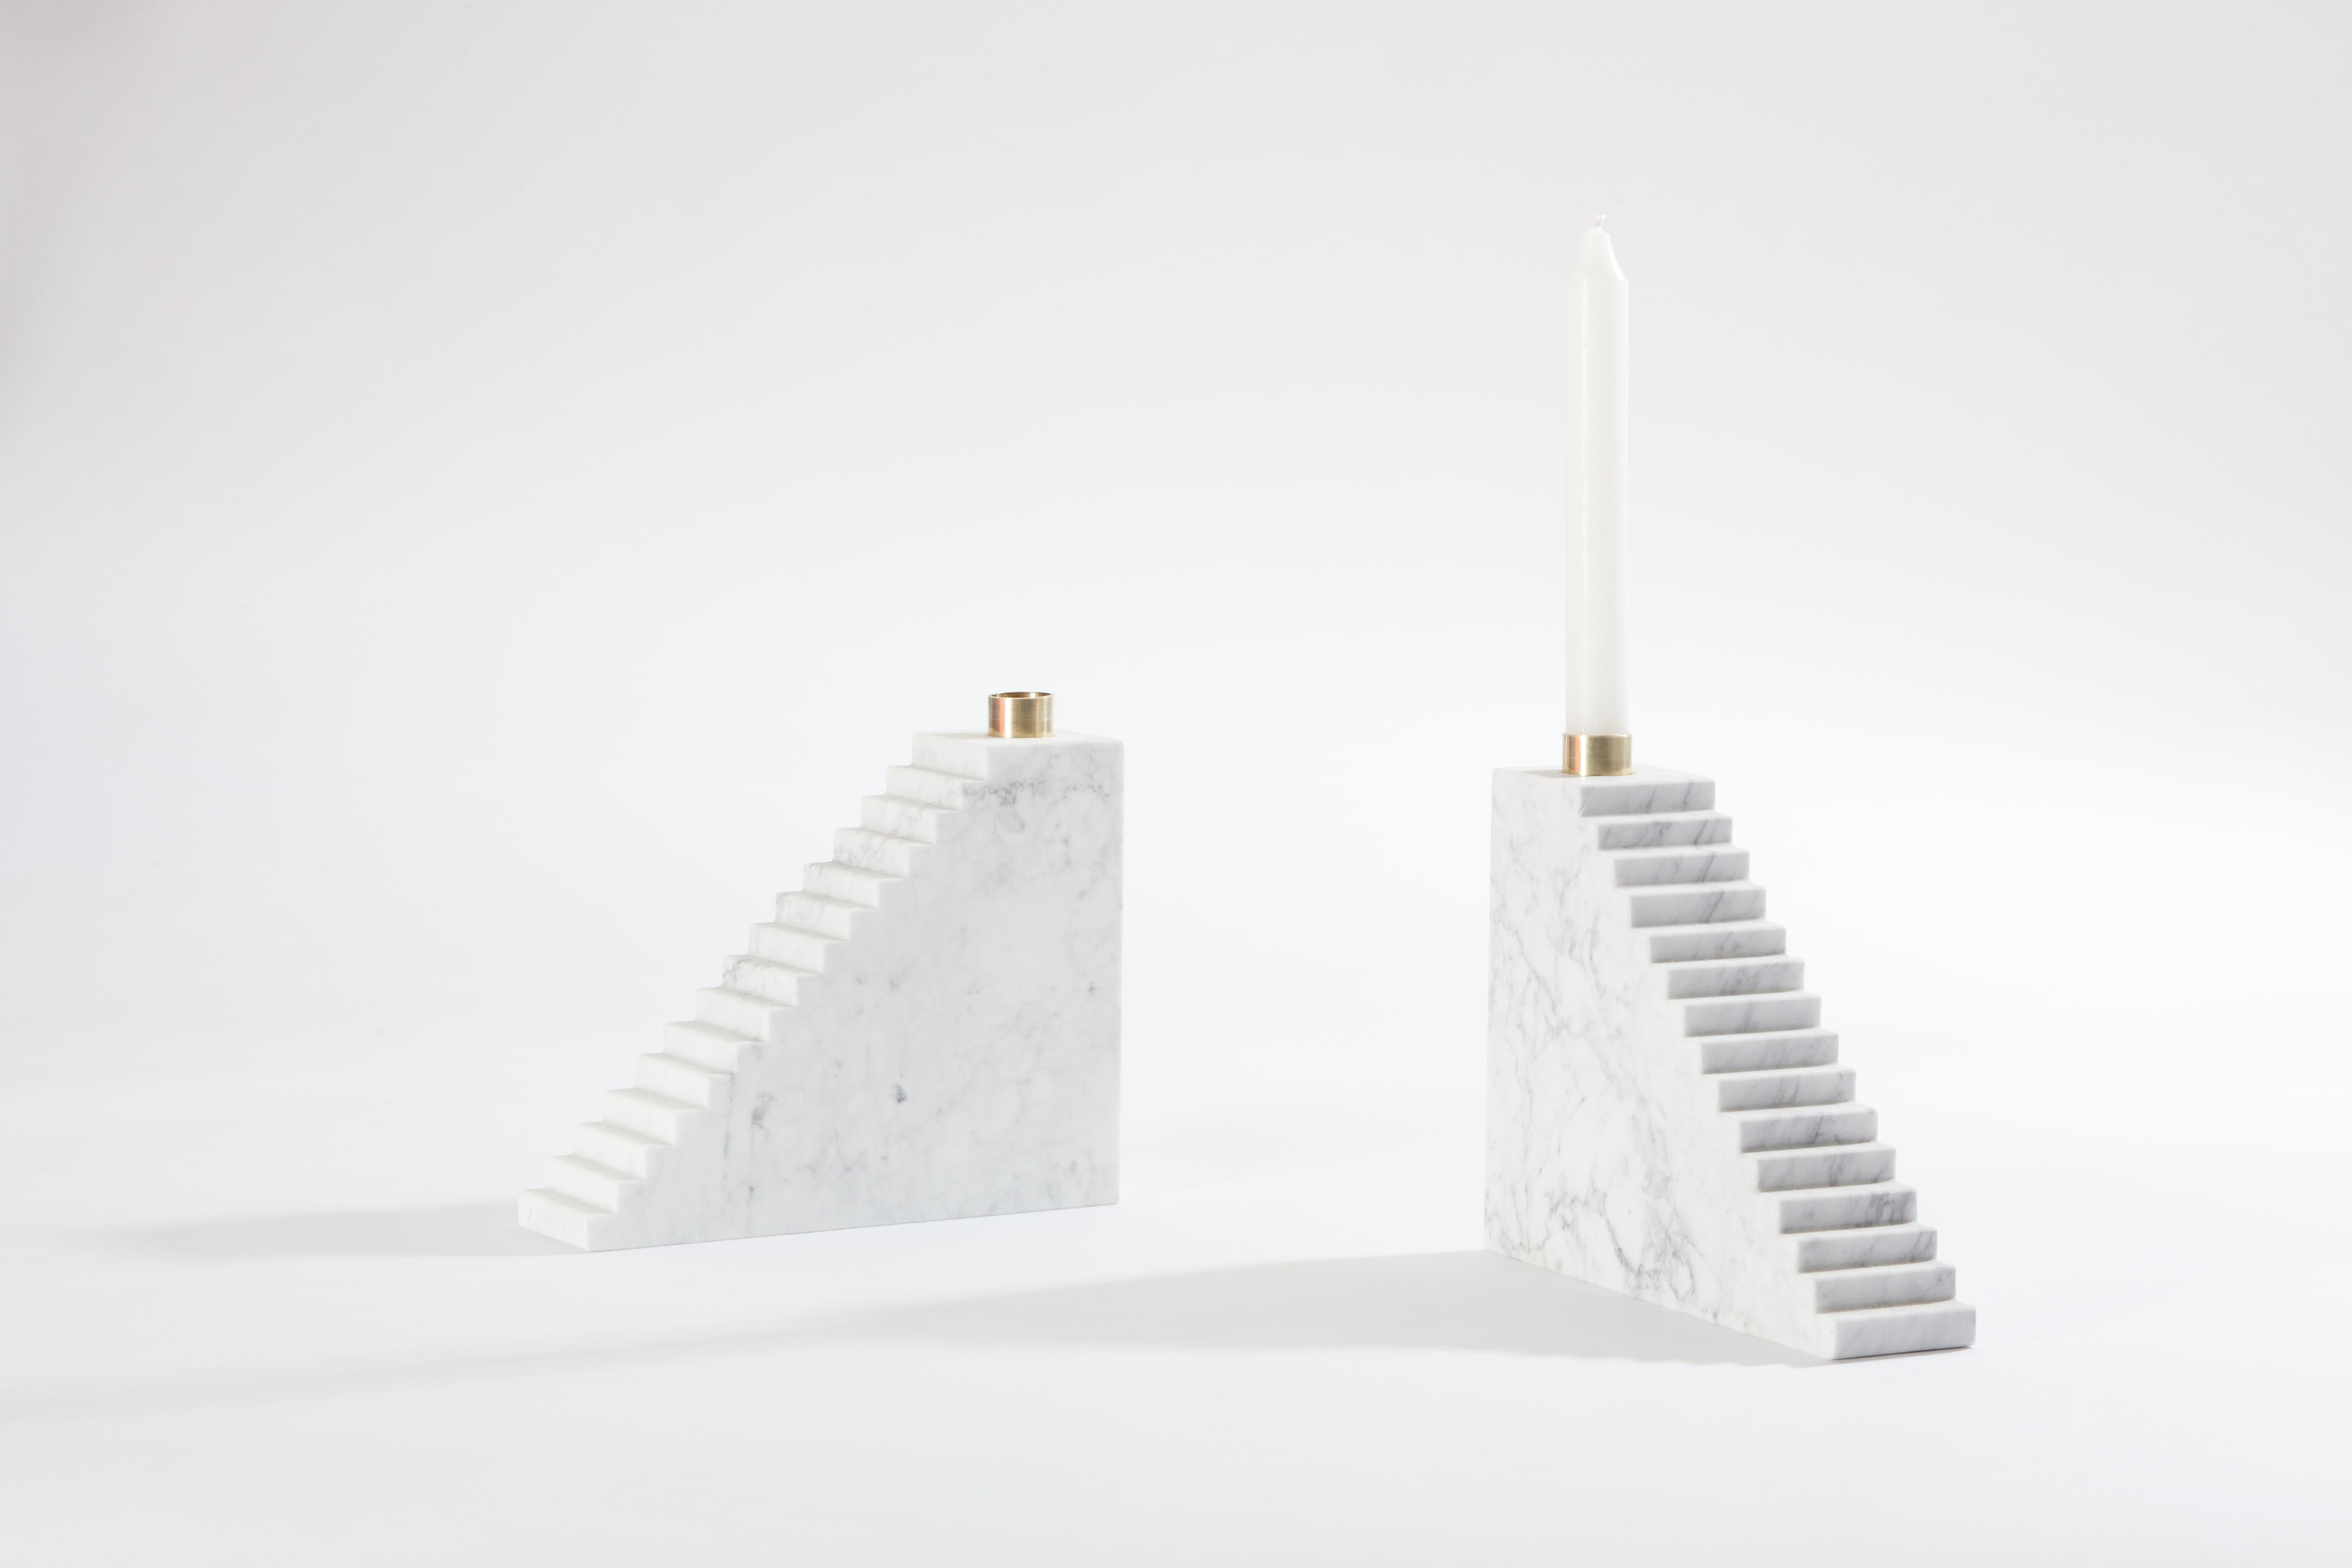 Set of 2 marble stairs by Joseph Vila Capdevila
Material: Carrara marble, brass
Dimensions: 15 x 20.5 x 5 cm
Weight: 2.5 kg

Aparentment is a space for creation and innovation, experimenting with materials with the goal to develop robust, lasting